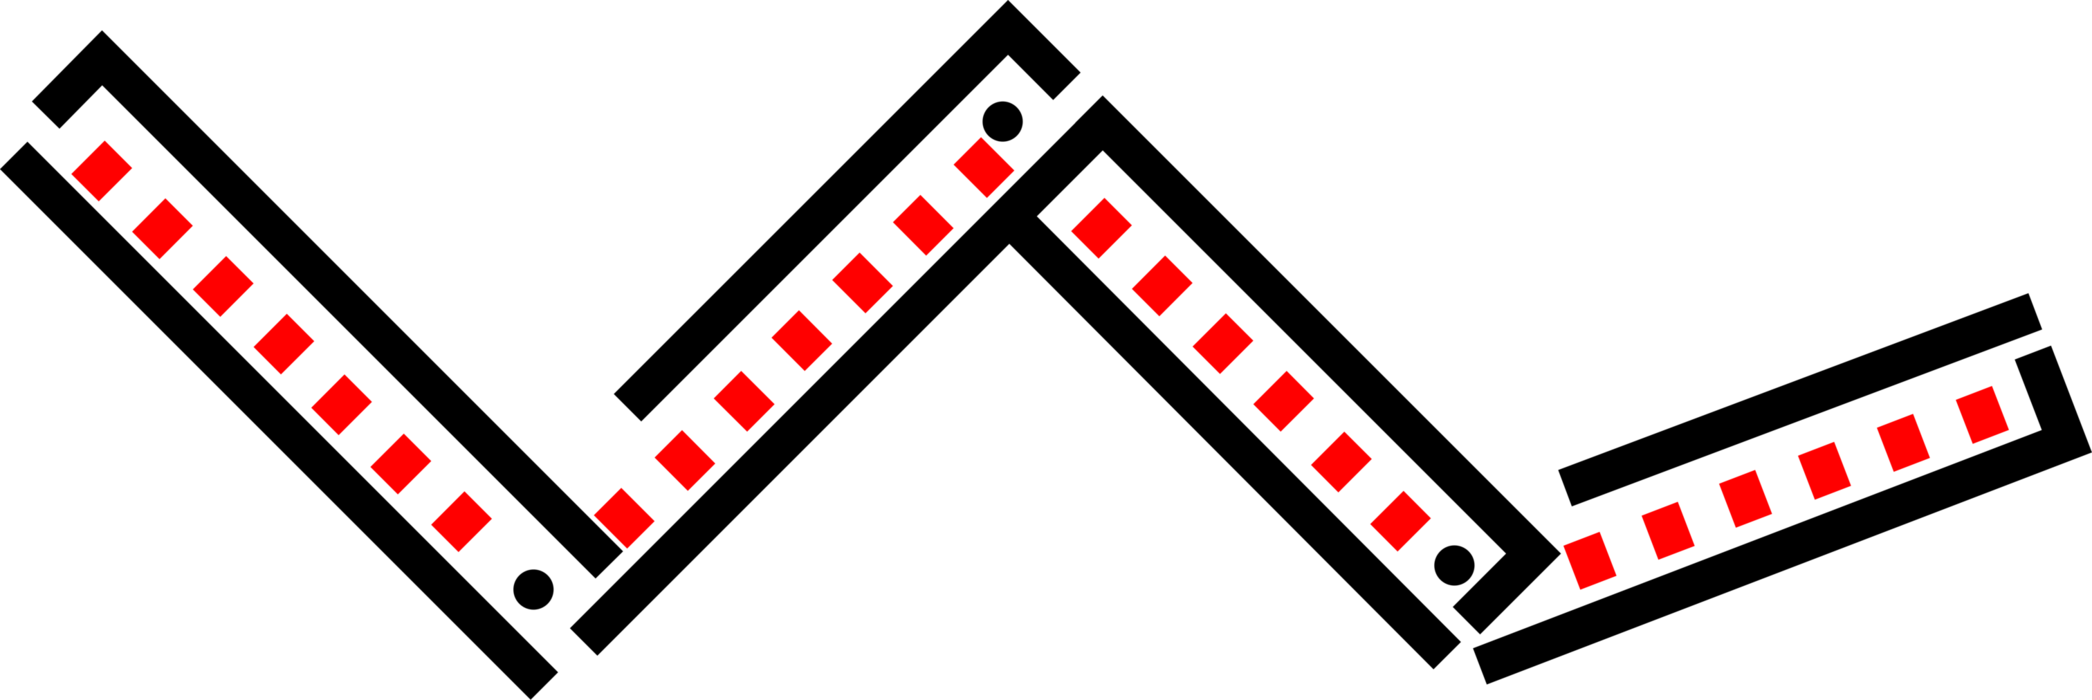 Vector Illustration of Ruler, Rule or Line Gauge Straight Edge Draws Lines and Measures Distances